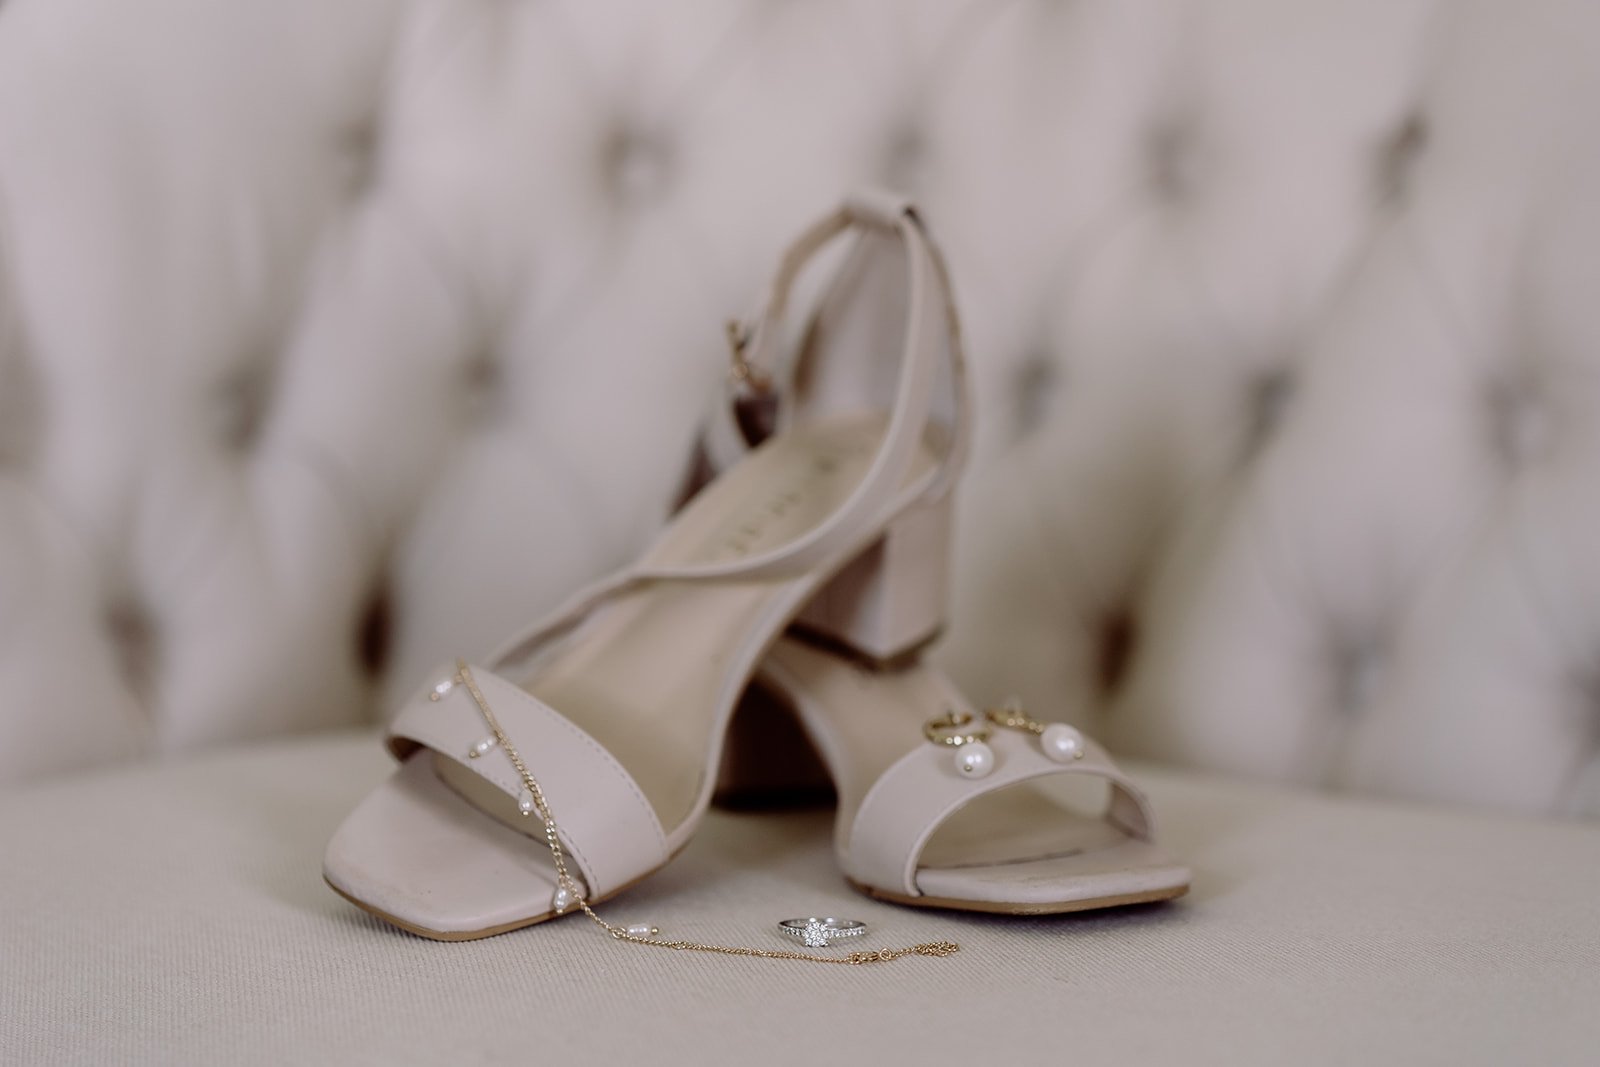 Bride's wedding shoes sitting on cream chaise lounge